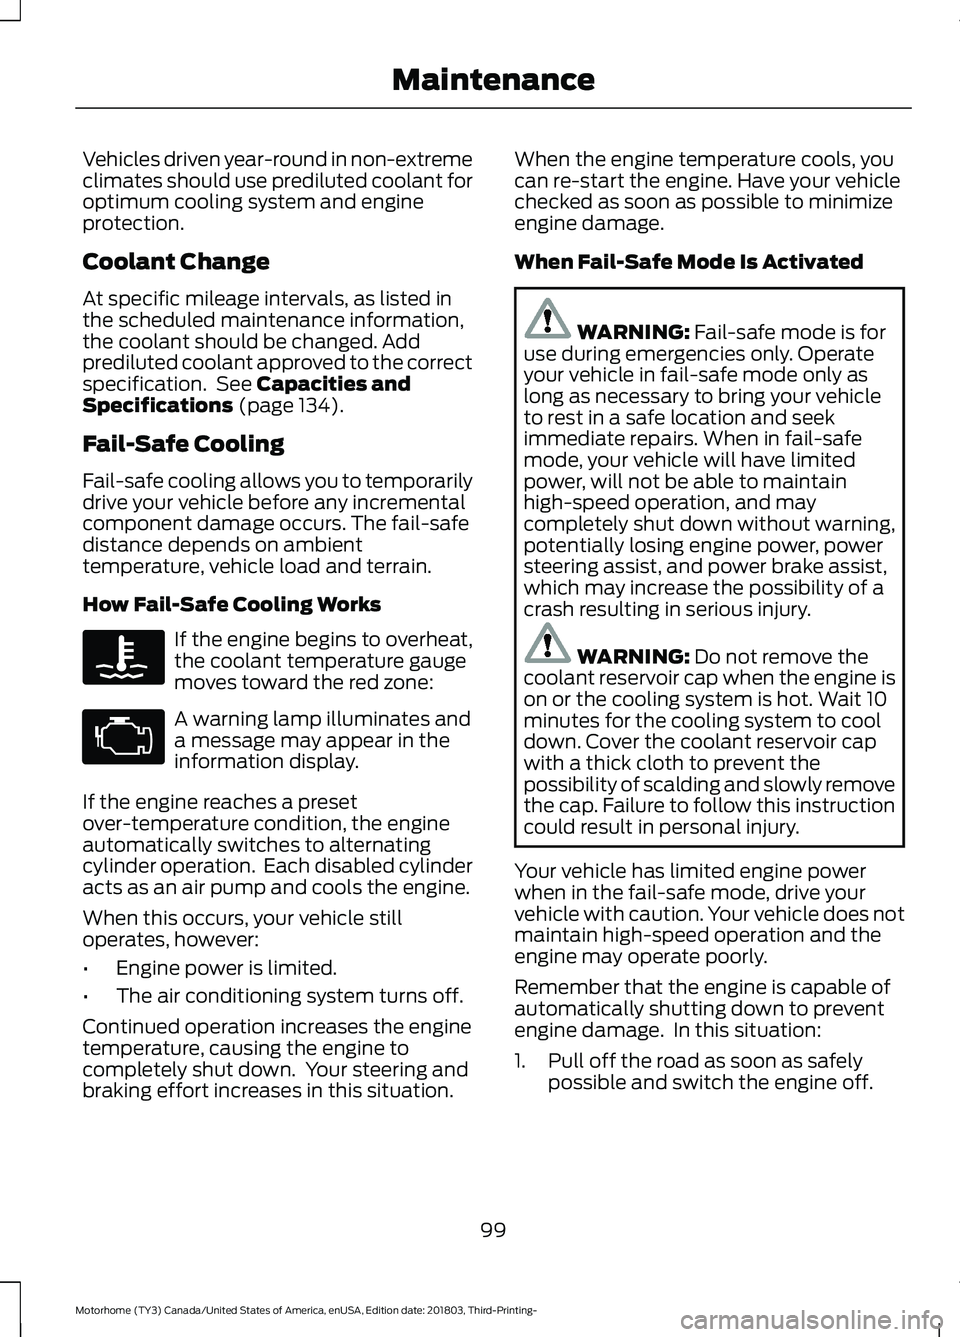 FORD F-59 2019  Owners Manual Vehicles driven year-round in non-extremeclimates should use prediluted coolant foroptimum cooling system and engineprotection.
Coolant Change
At specific mileage intervals, as listed inthe scheduled 